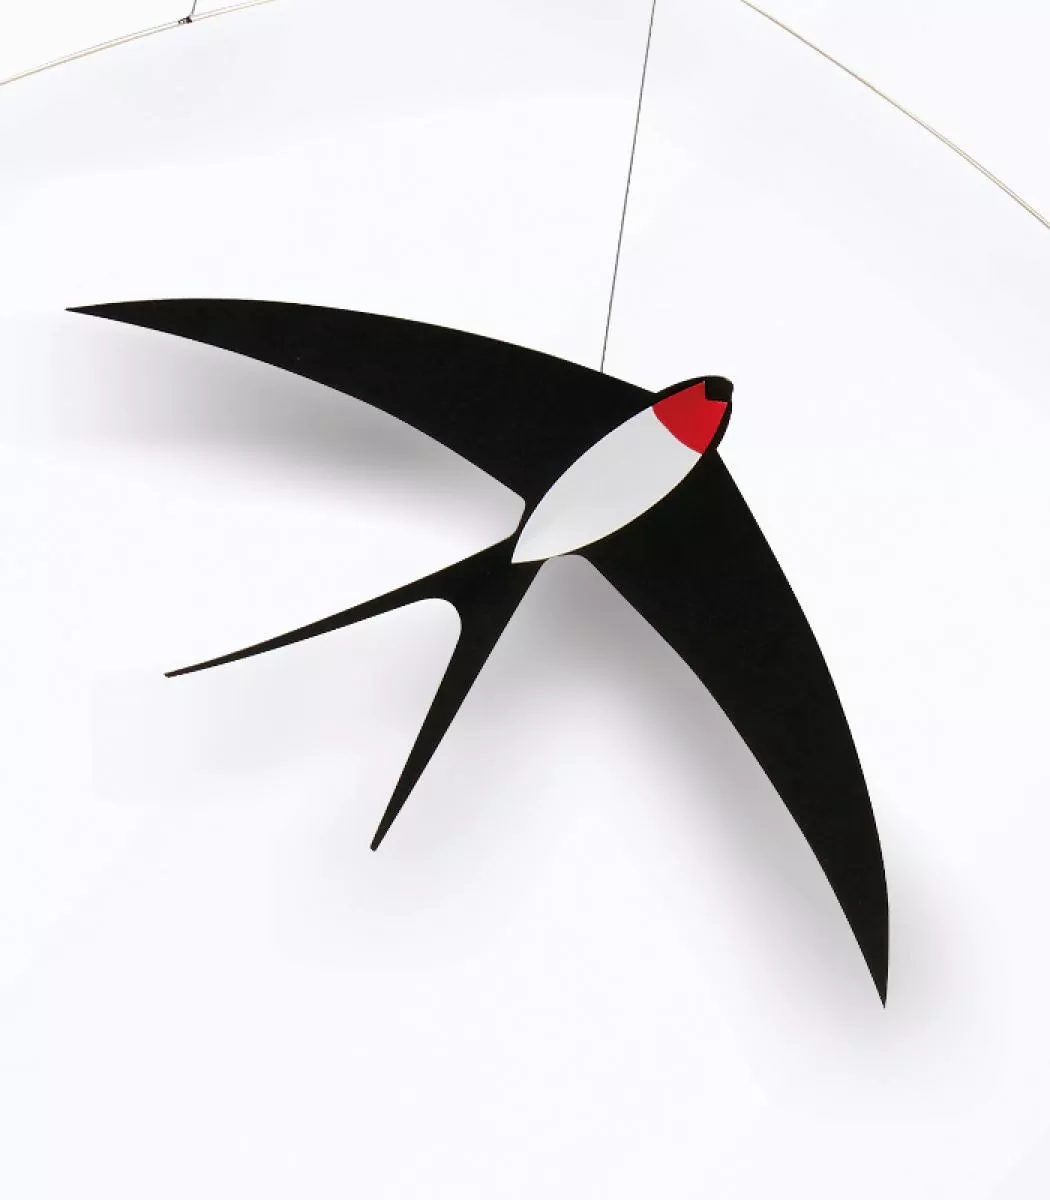 Five Swallows - Mobile for babies and children by Flensted | Kunstbaron